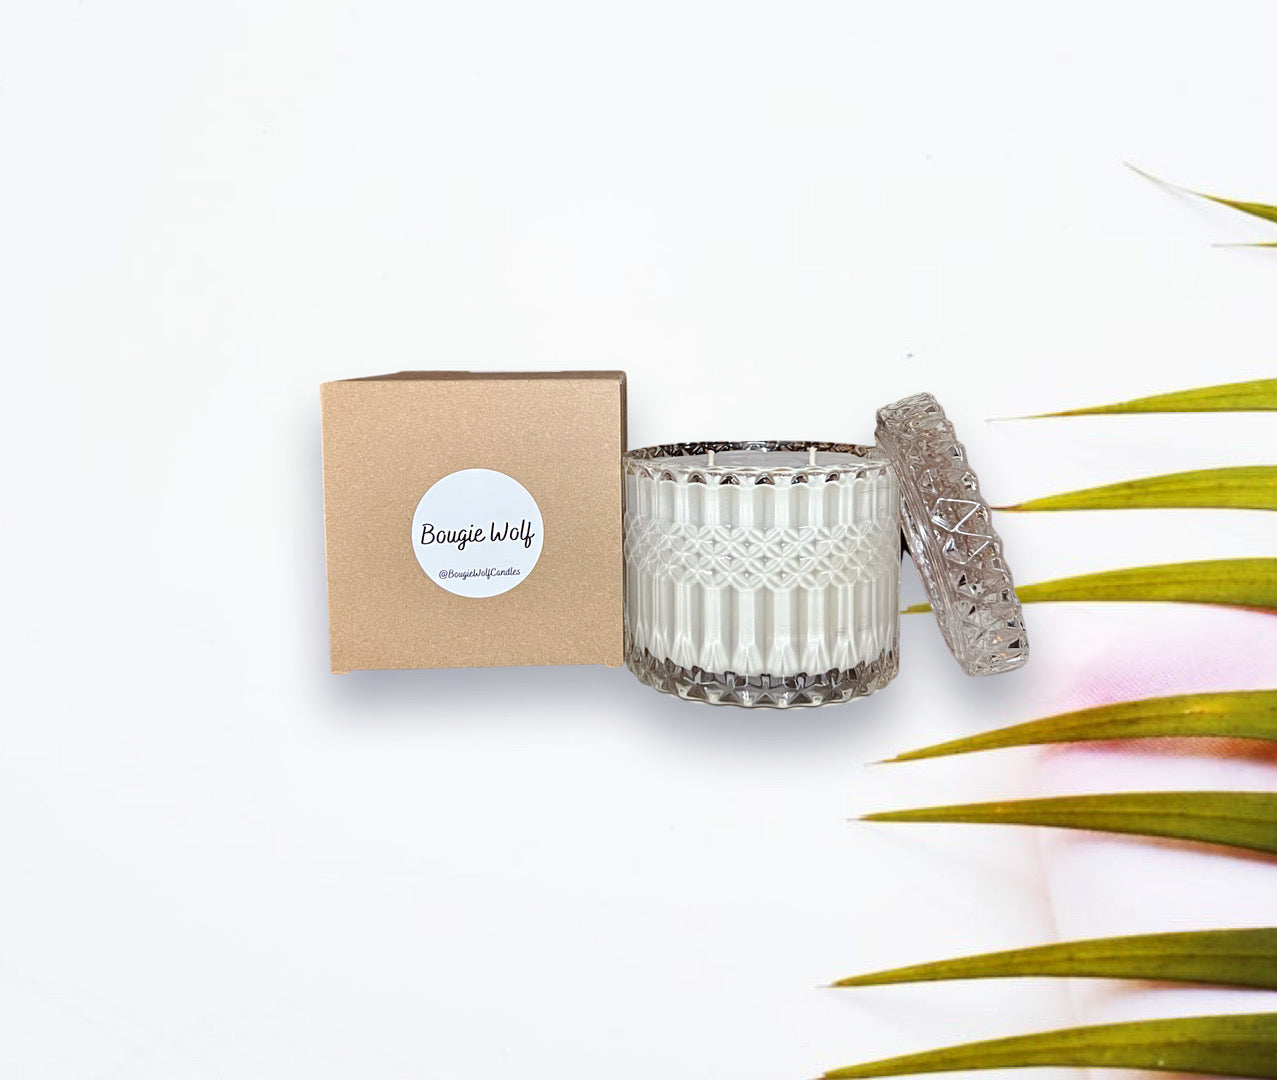 Premium Australian brand melbourne, wax deluxe soy candle Bougie Wolf Candles, light throw, cotton, crystal cut, long lasting, best scent throw, mandala, better than glasshouse because they have a better scent throw. lemongrass coconut luscious murphy's law calming coconut and lemongrass fragrance candles soy melbourne hand poured australia 